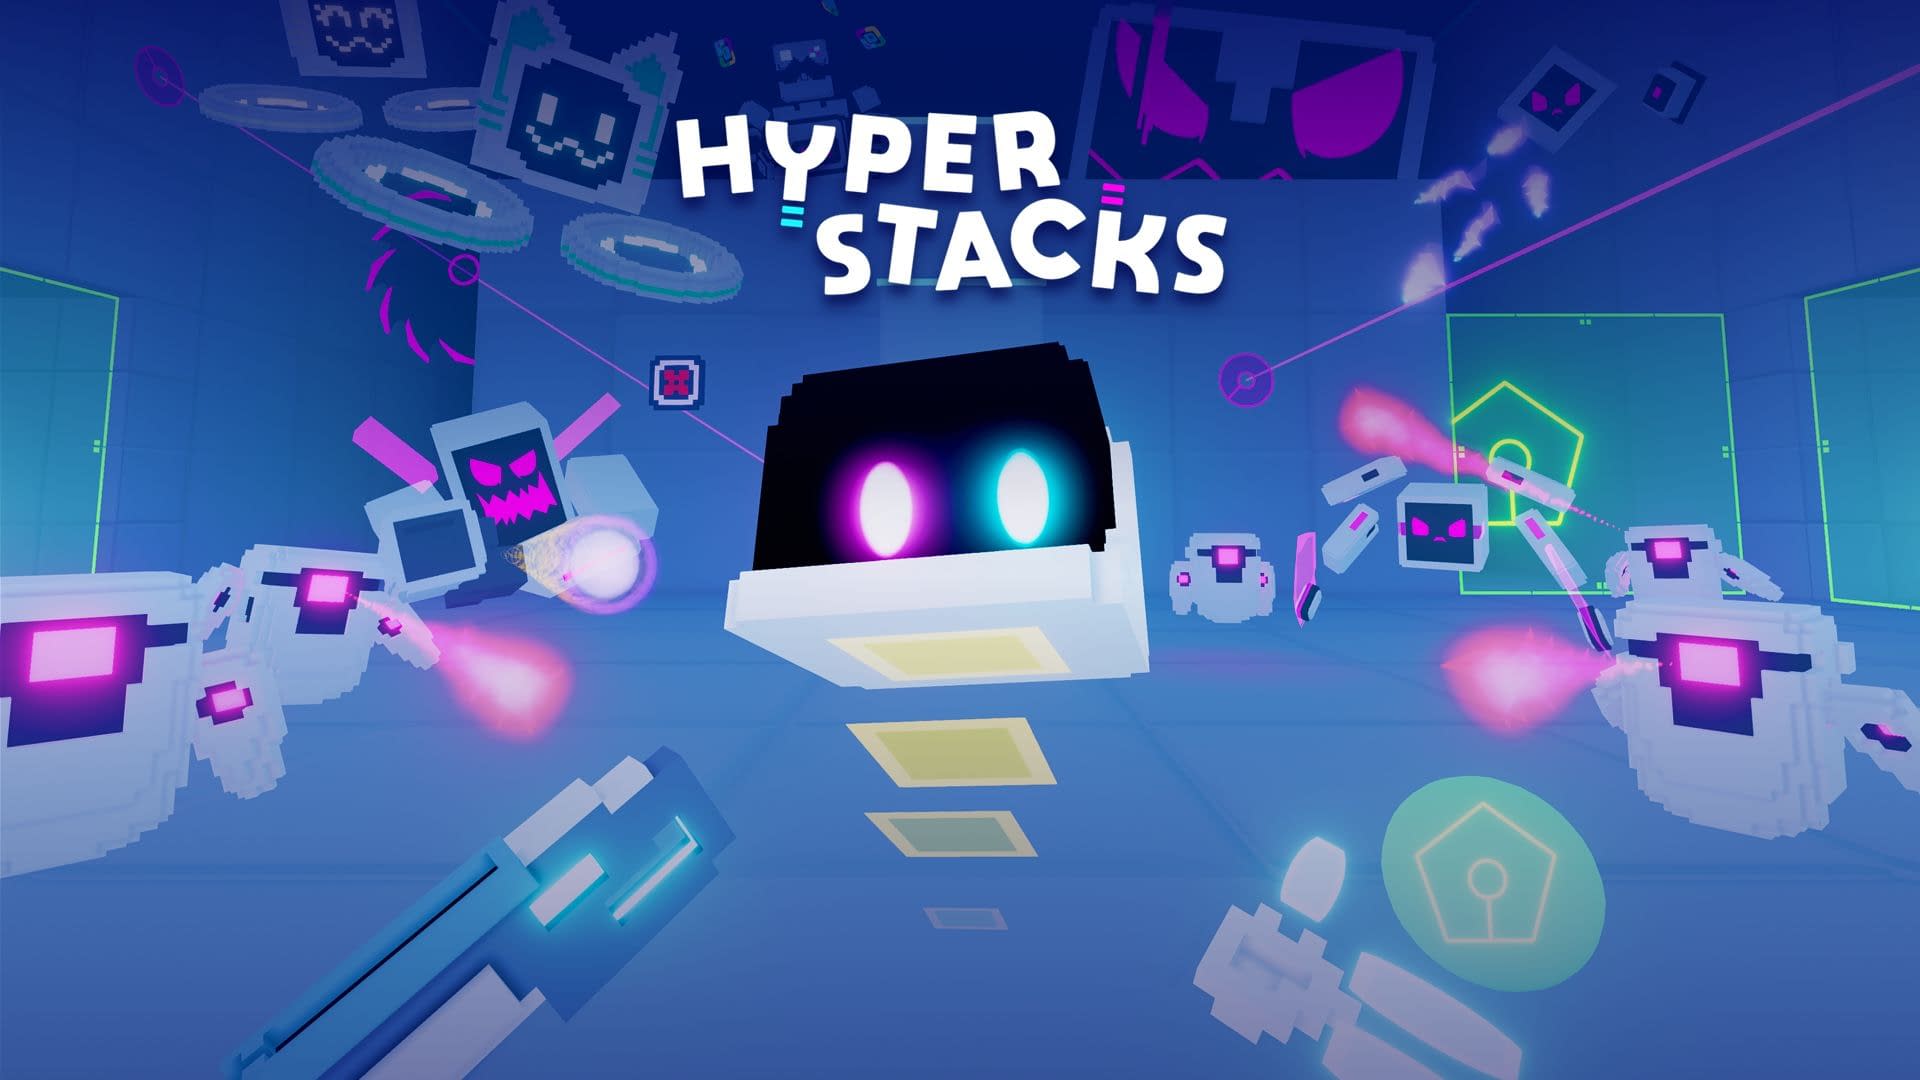 Vr Puzzler Hyperstacks Will Be Coming To Steam Q2 21